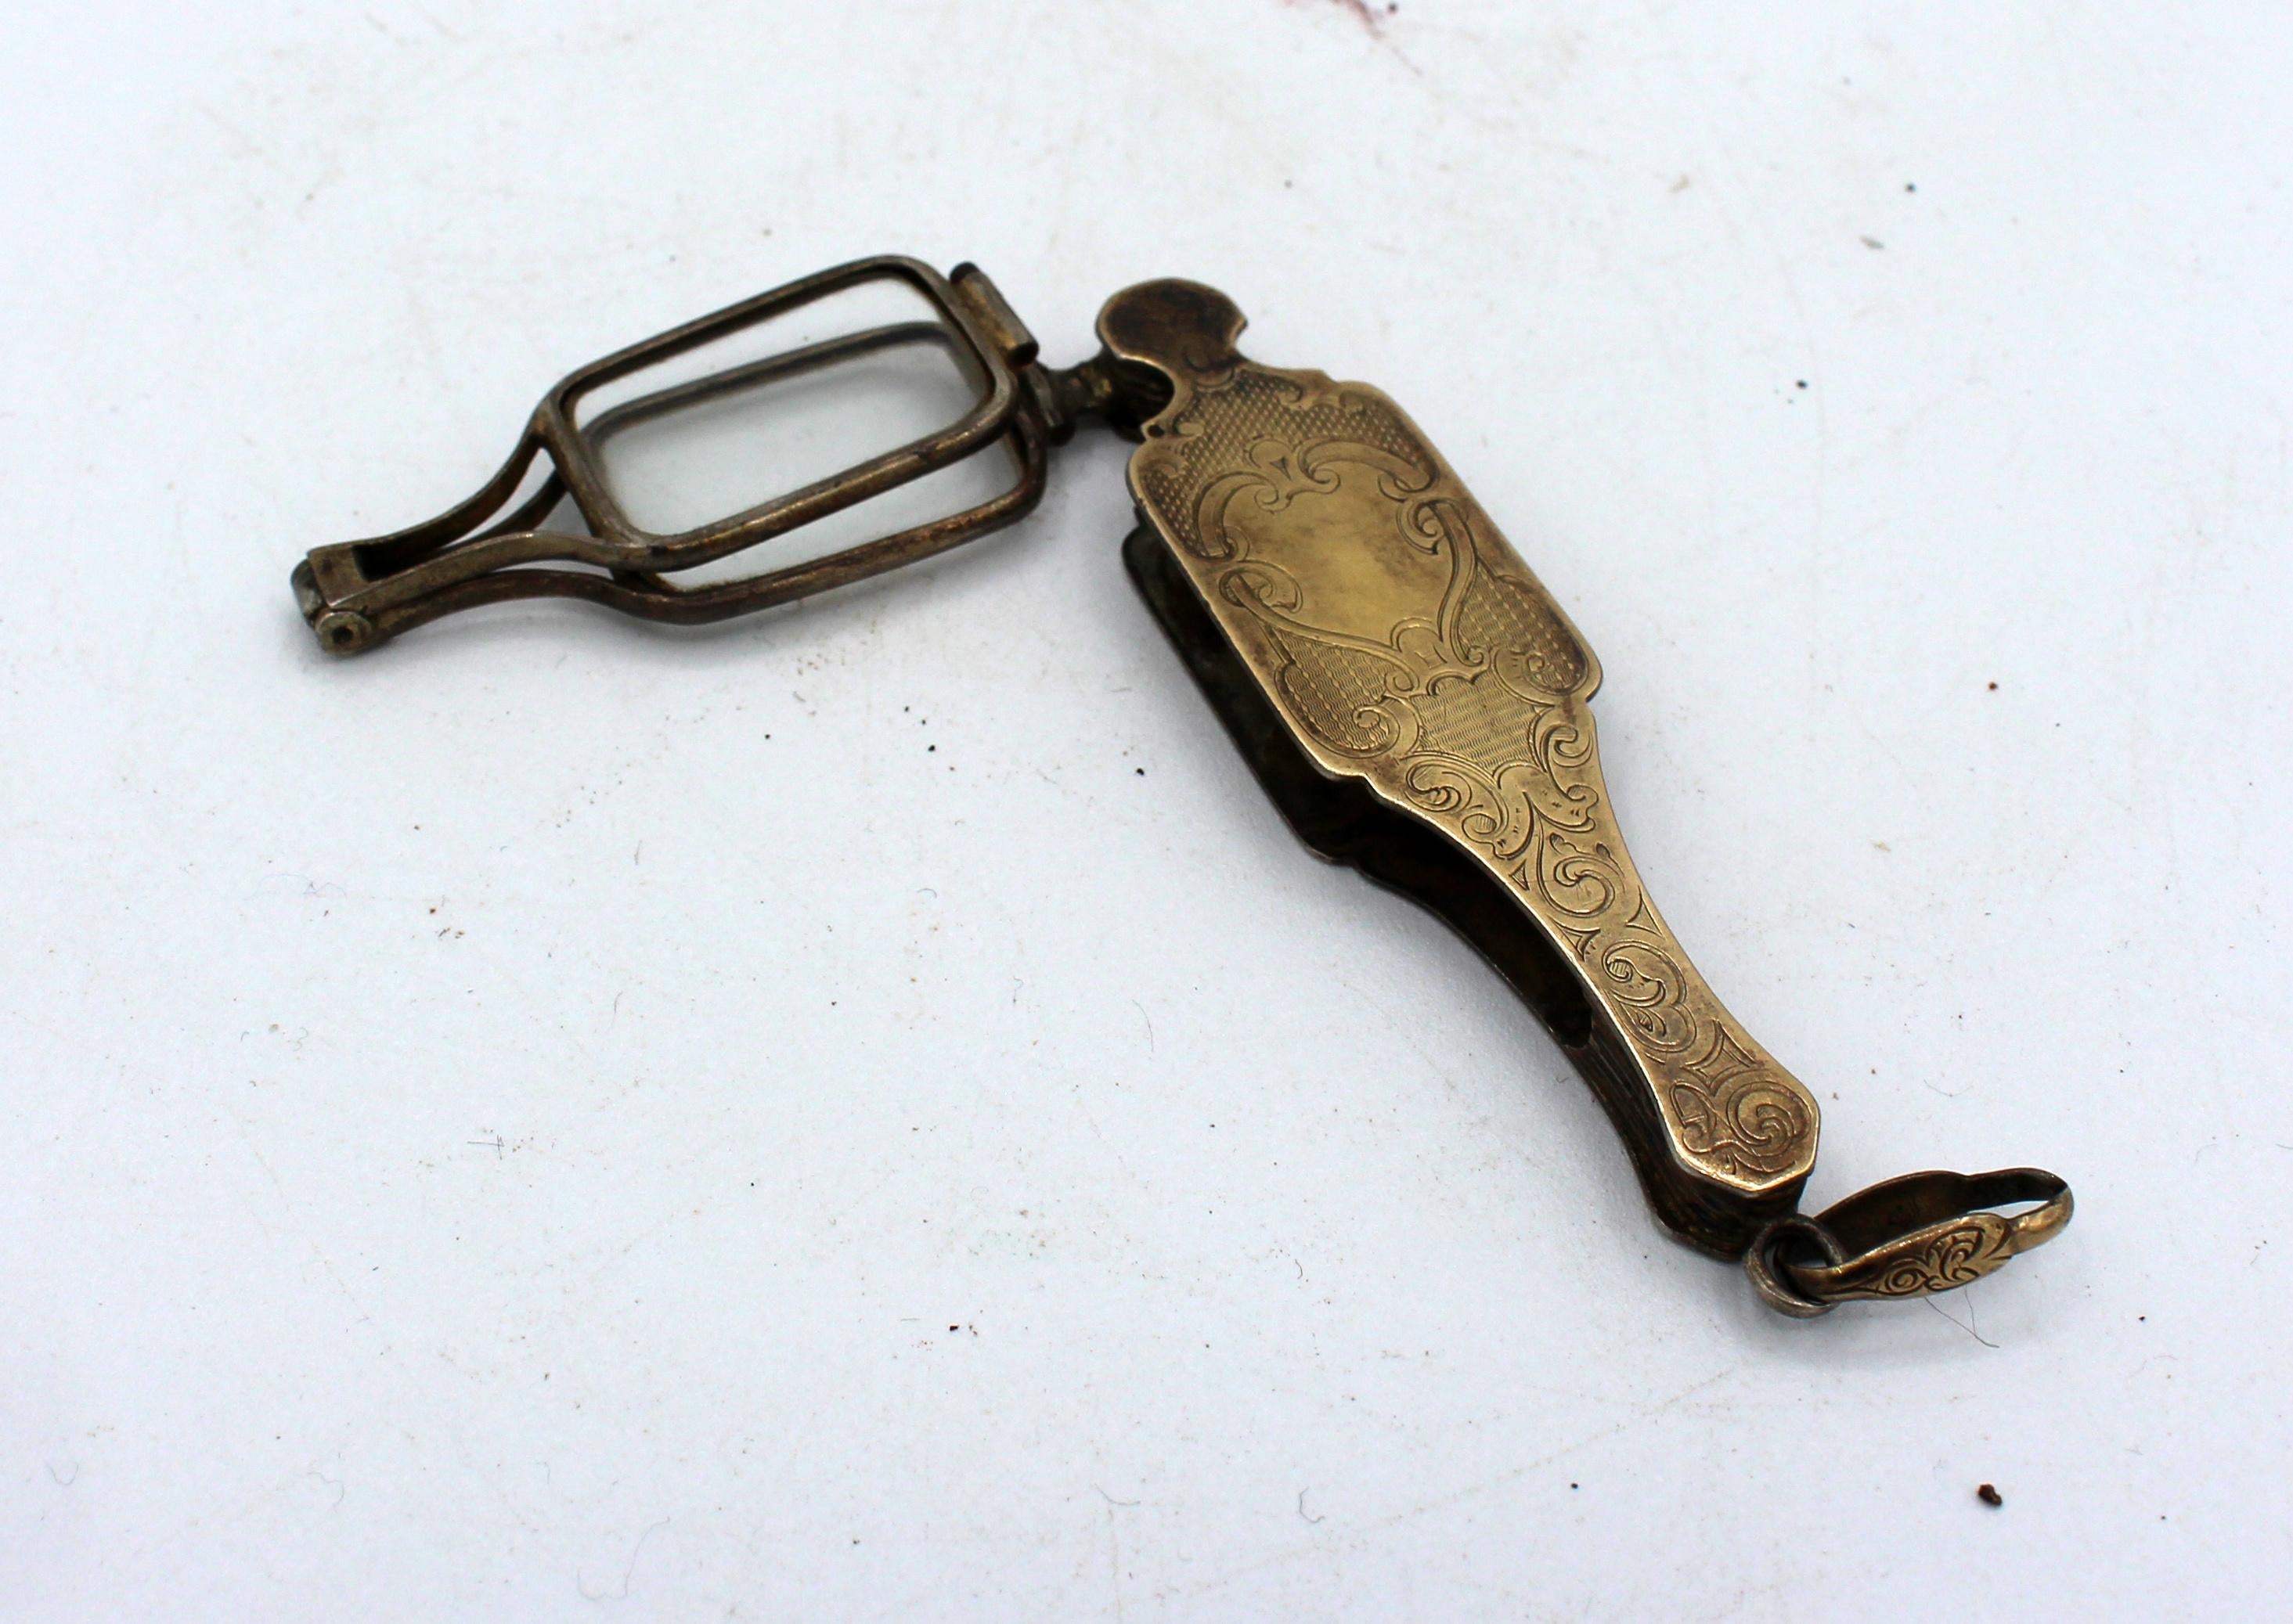 19th century French gilt silver Lorgnette in a solid gilt silver case. Trigger release.
3 1/4